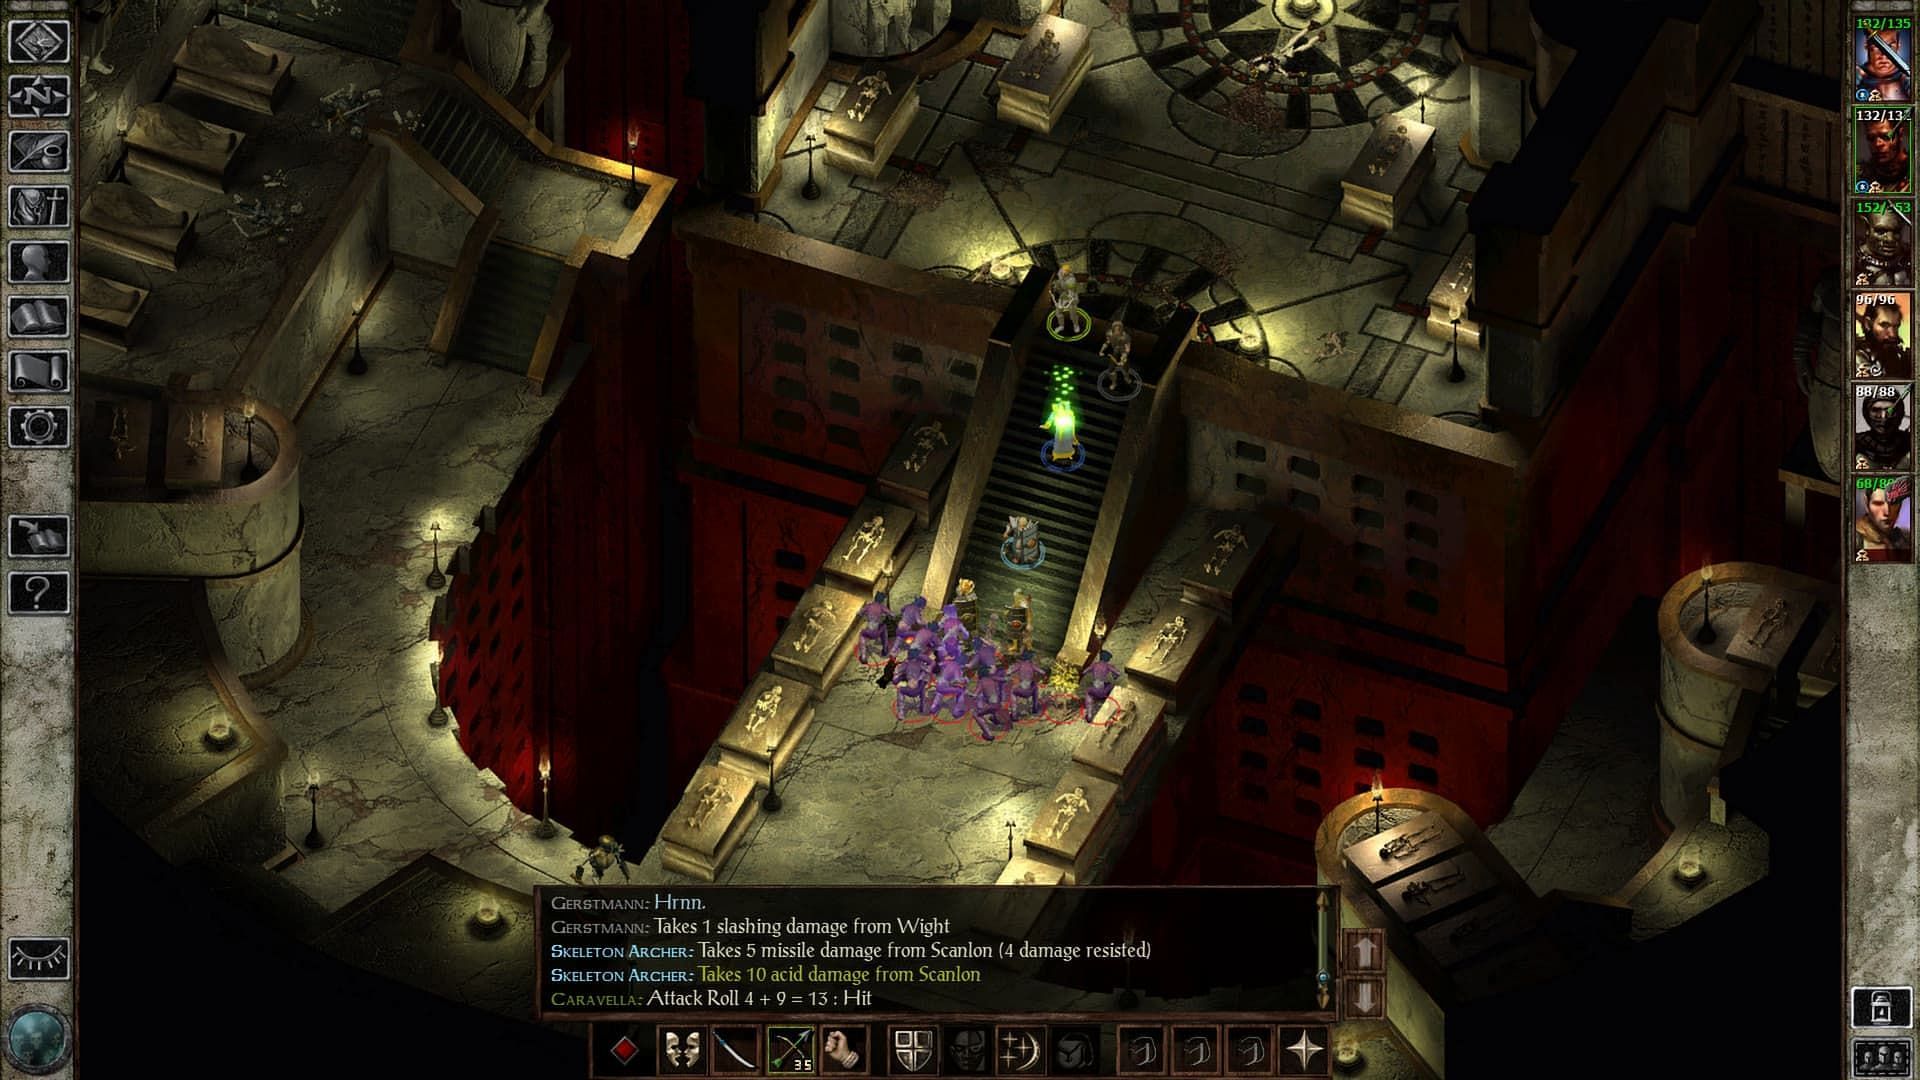 Icewind Dale is a Dungeons and Dragons-based CRPG (Image via Black Isle Studios)